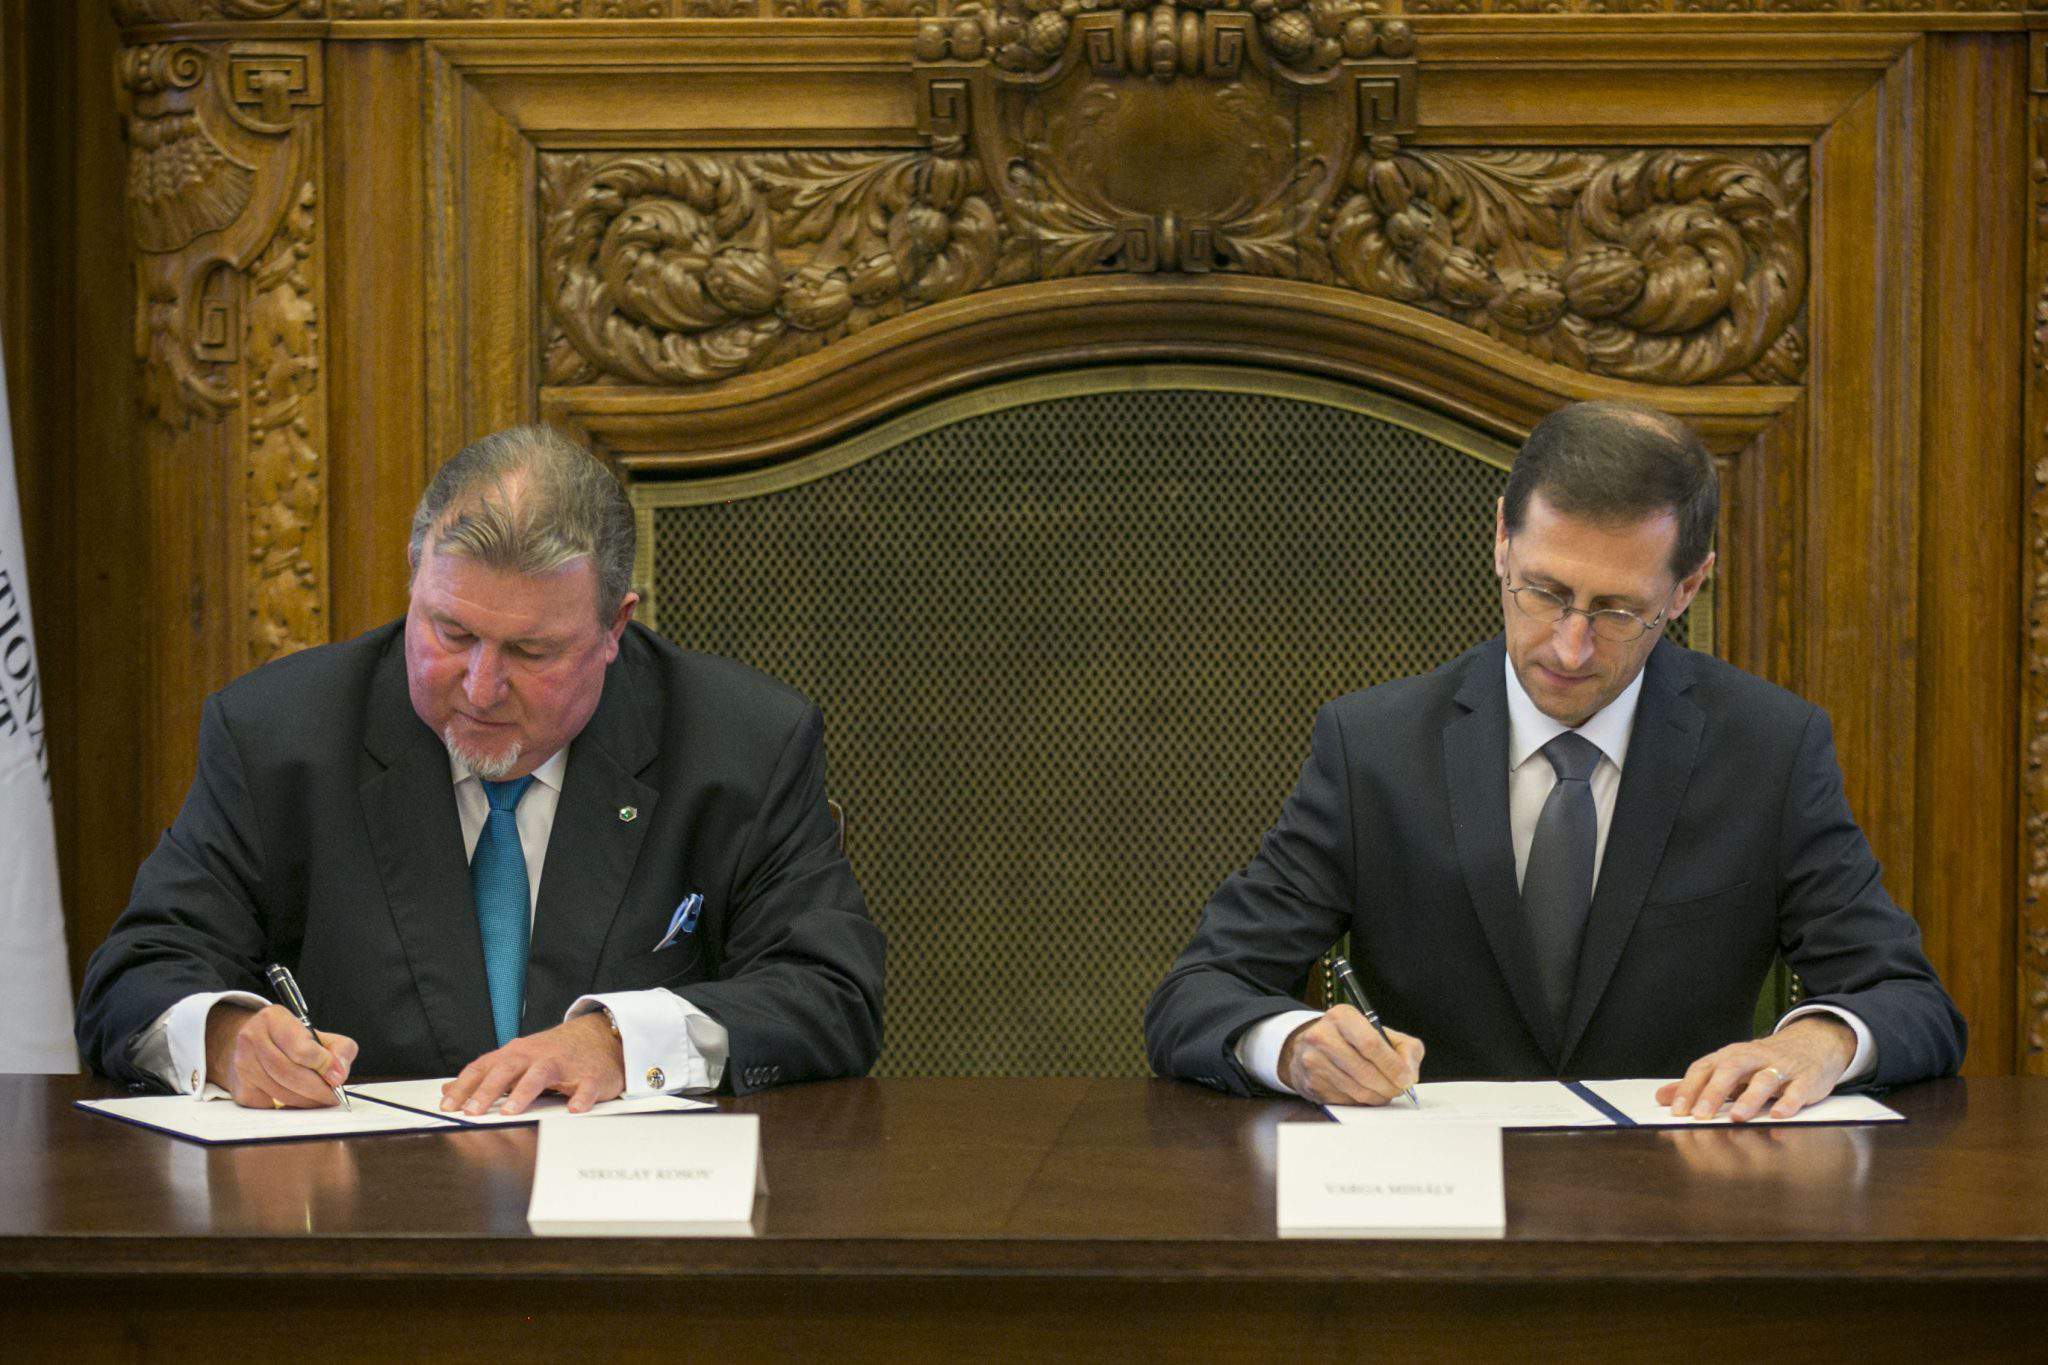 Investment bank IIB, Varga initial agreement to bringing regional office to Hungary